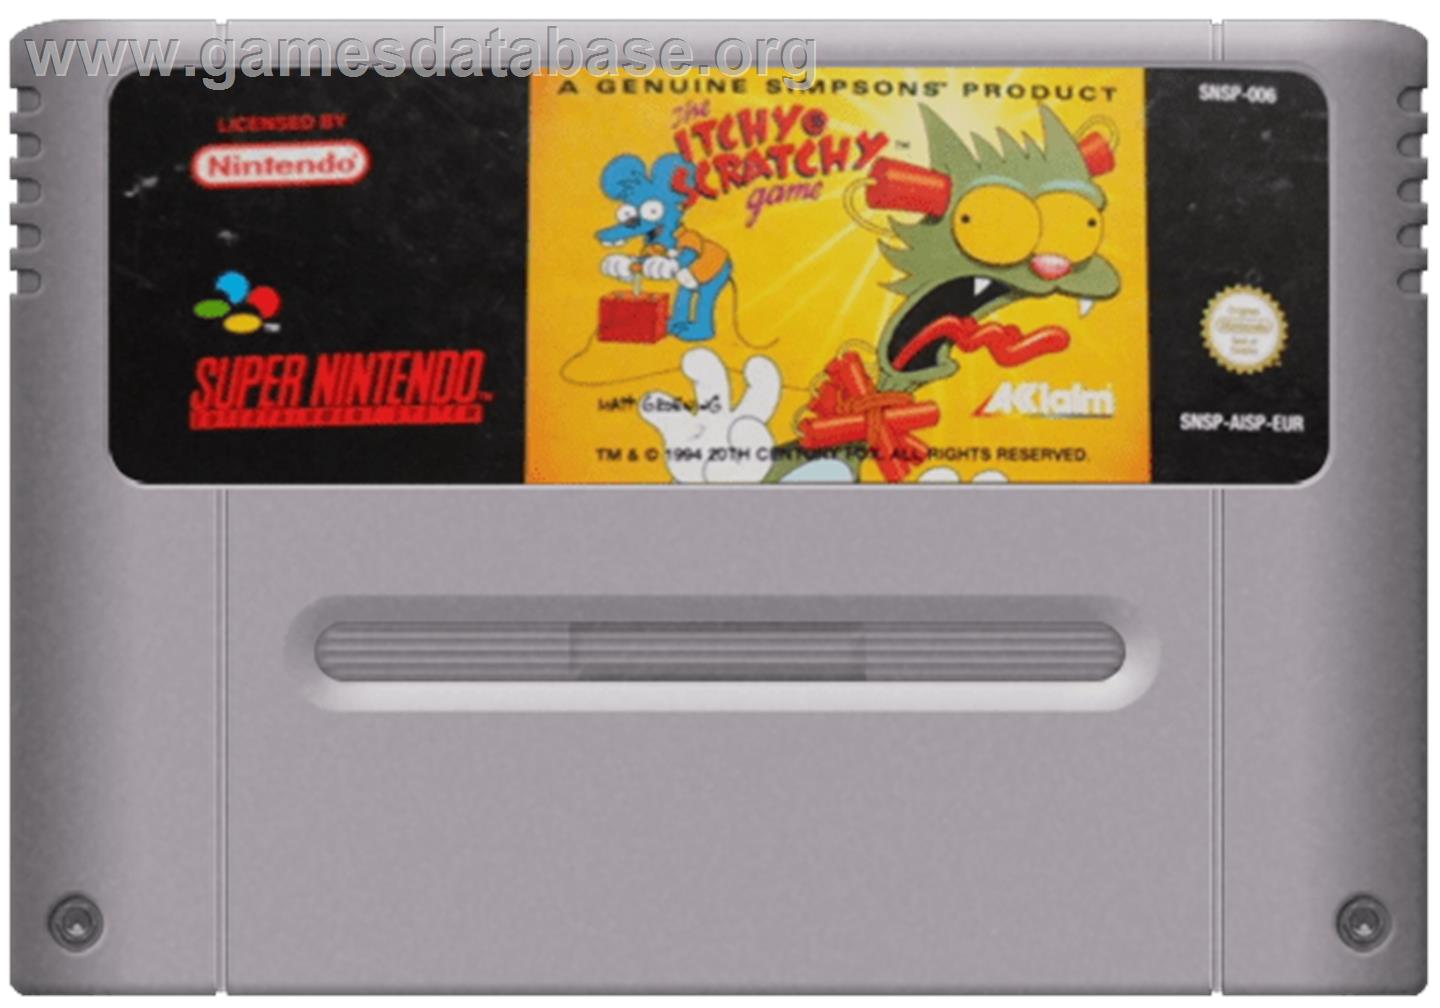 The Itchy & Scratchy Game - Nintendo SNES - Artwork - Cartridge